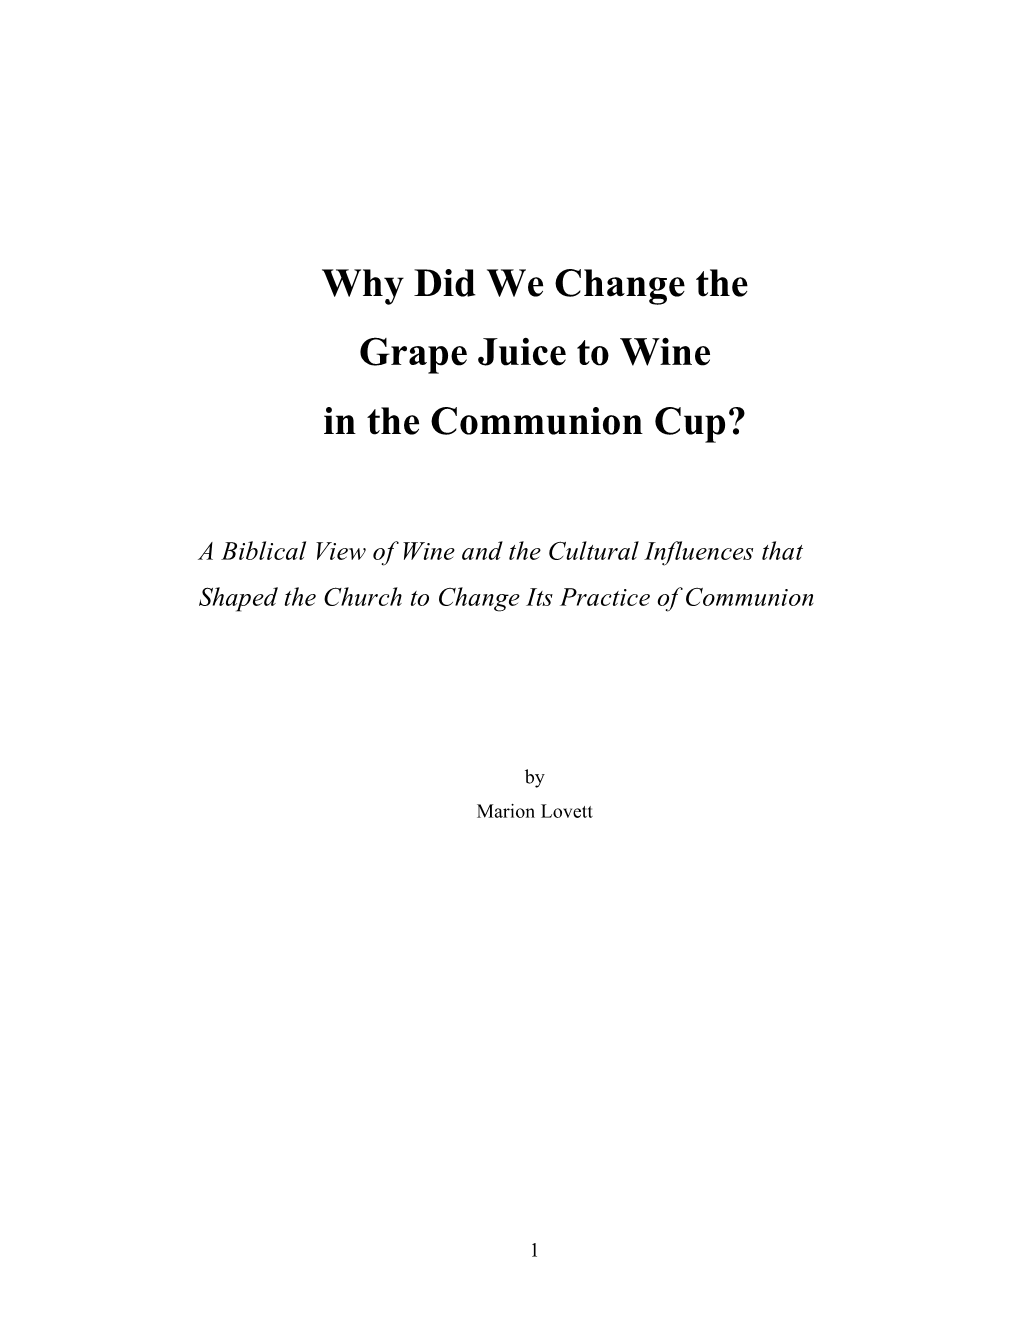 Wine in Communion to Grape Juice to Begin With?” This Question Addresses the Heart of the Matter More Pointedly